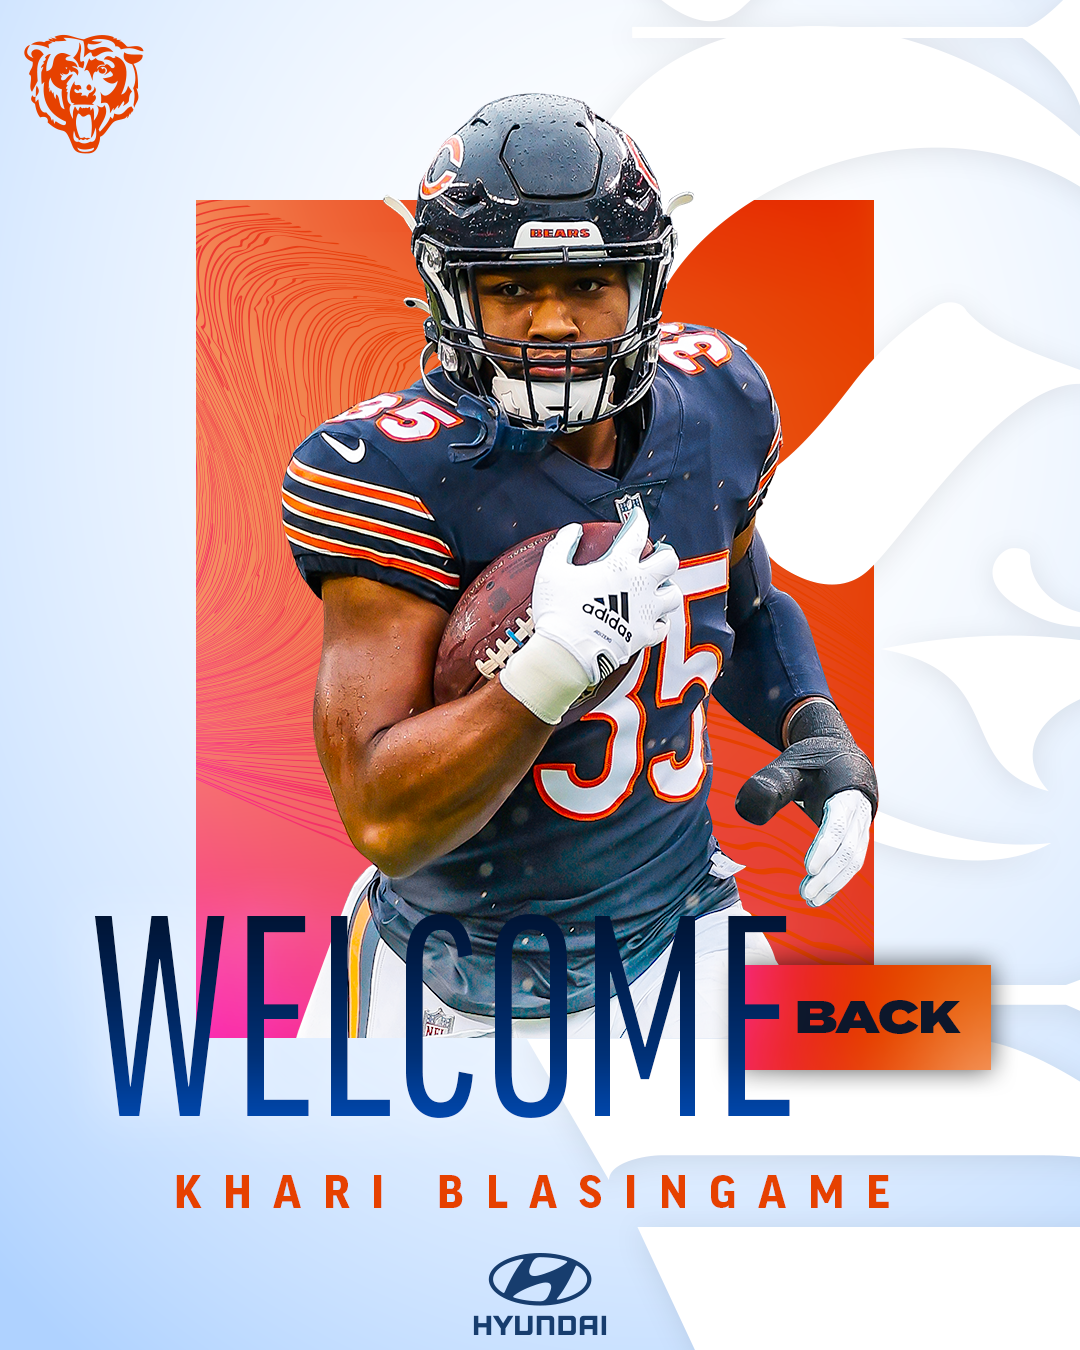 2023-FreeAgency-WELCOME_BACK-IG-4x5-1-BLASINGAME.png